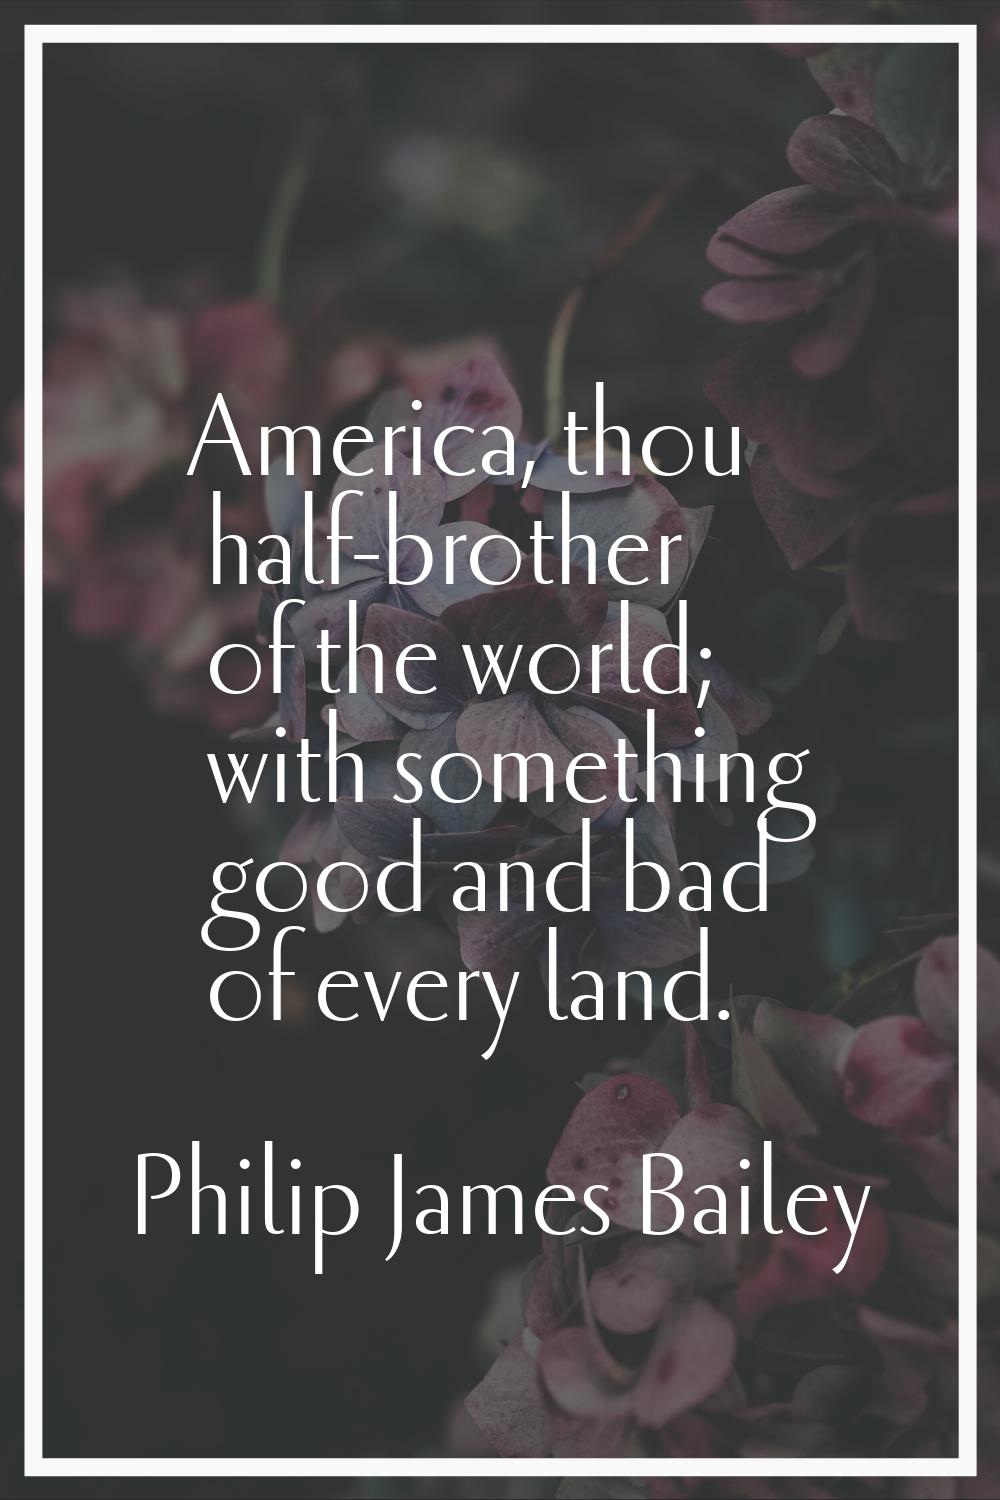 America, thou half-brother of the world; with something good and bad of every land.